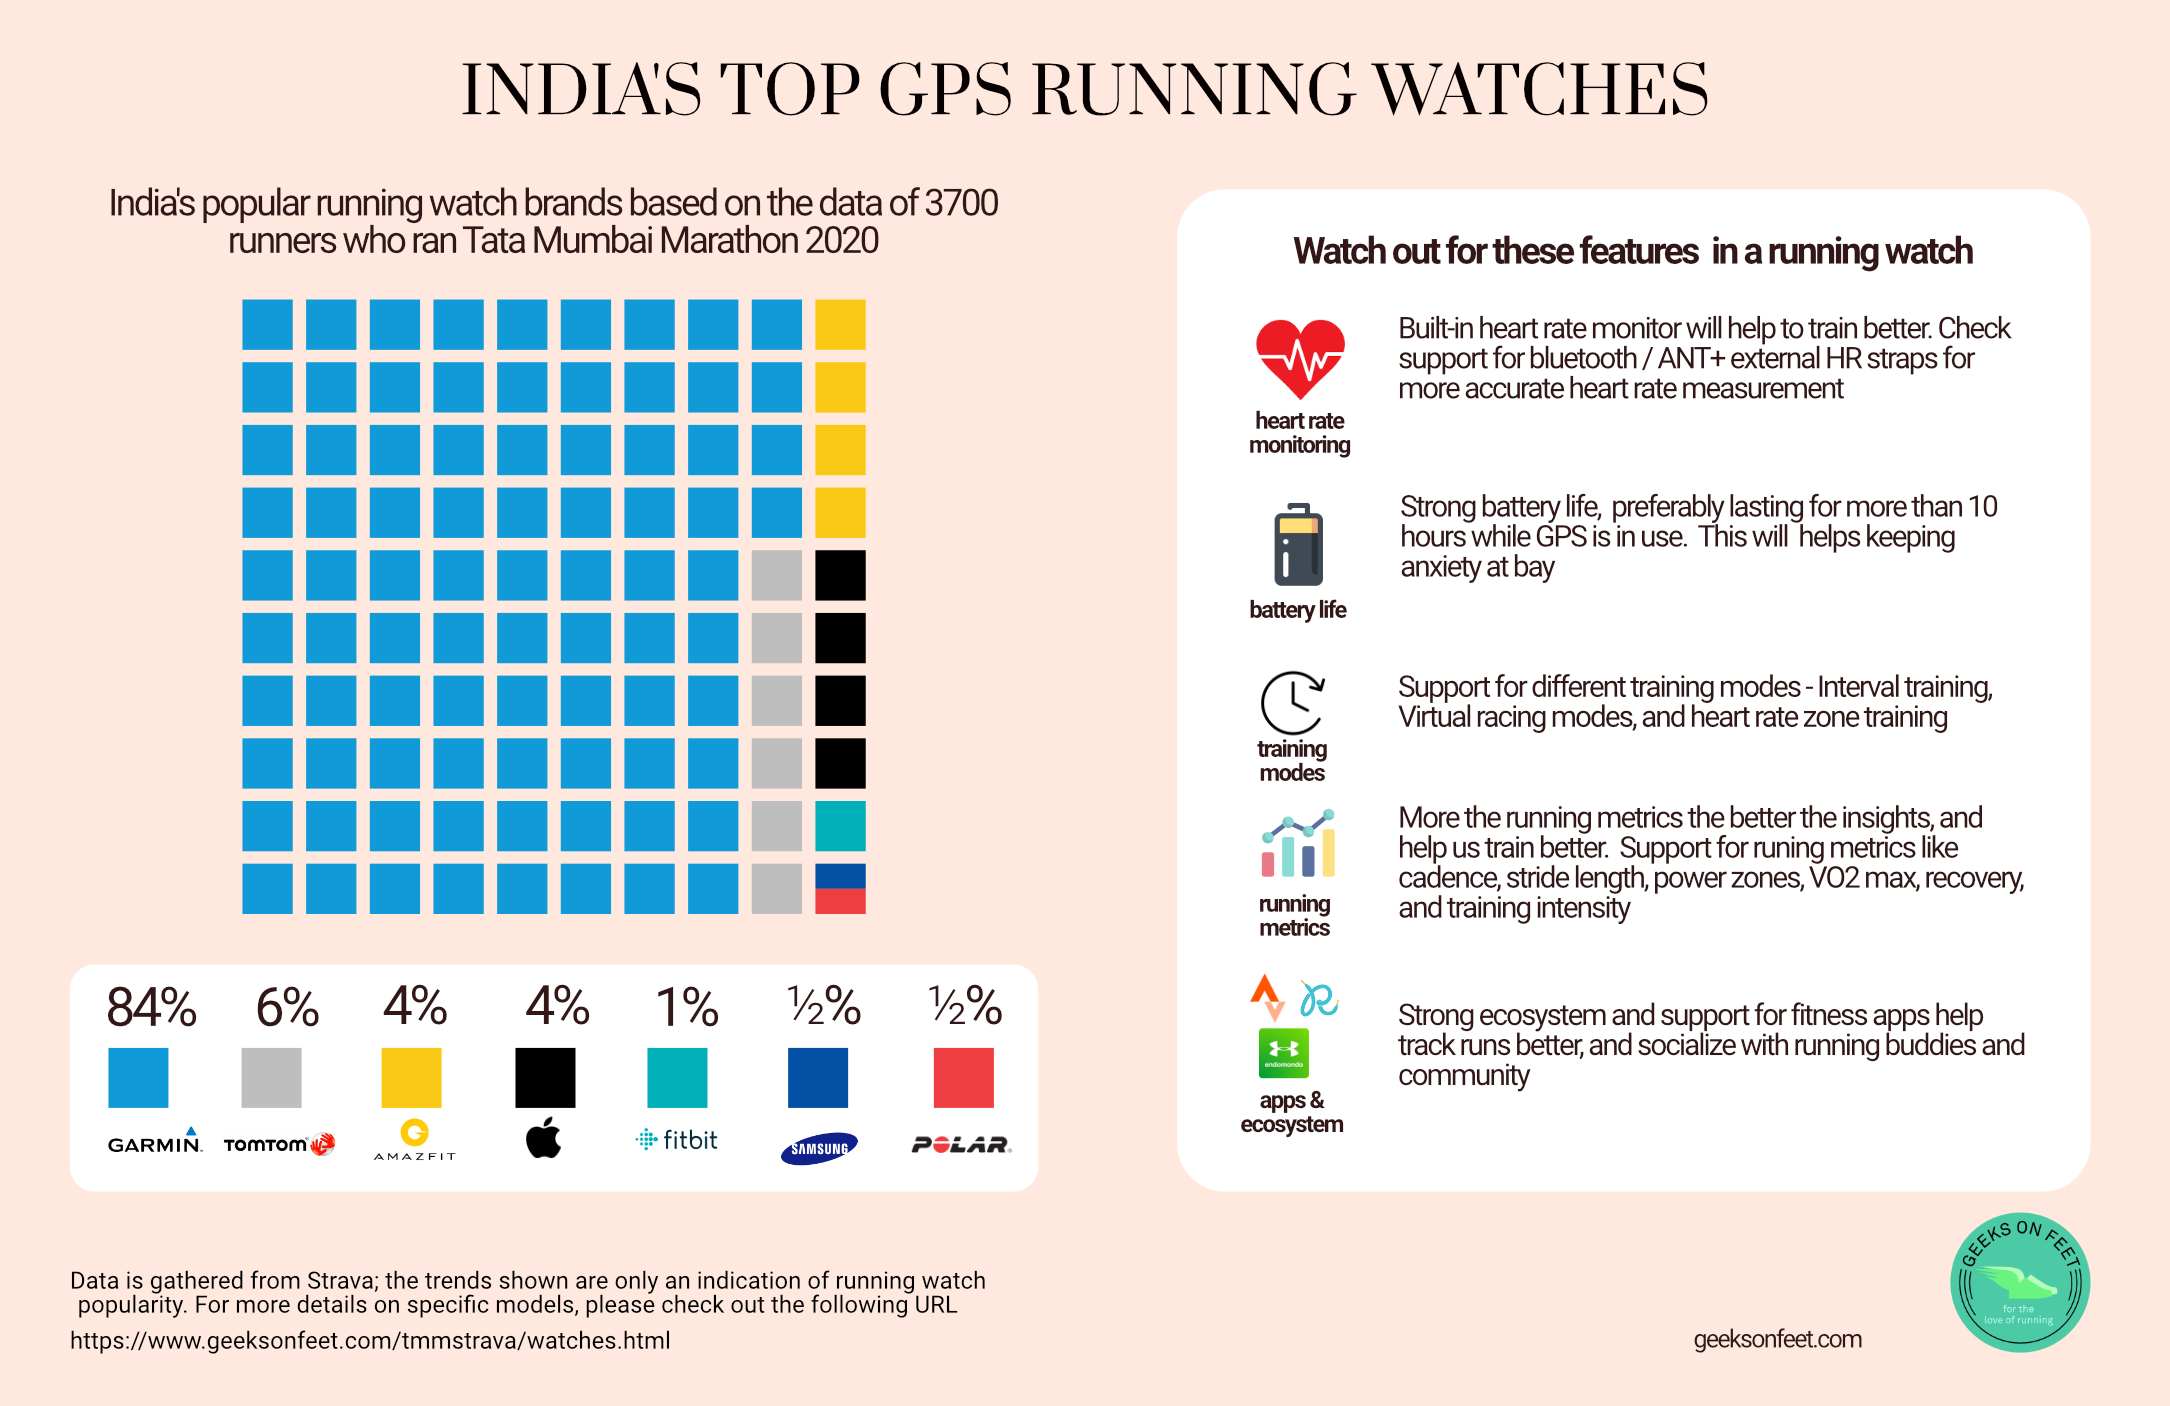 India's Top Running Watches